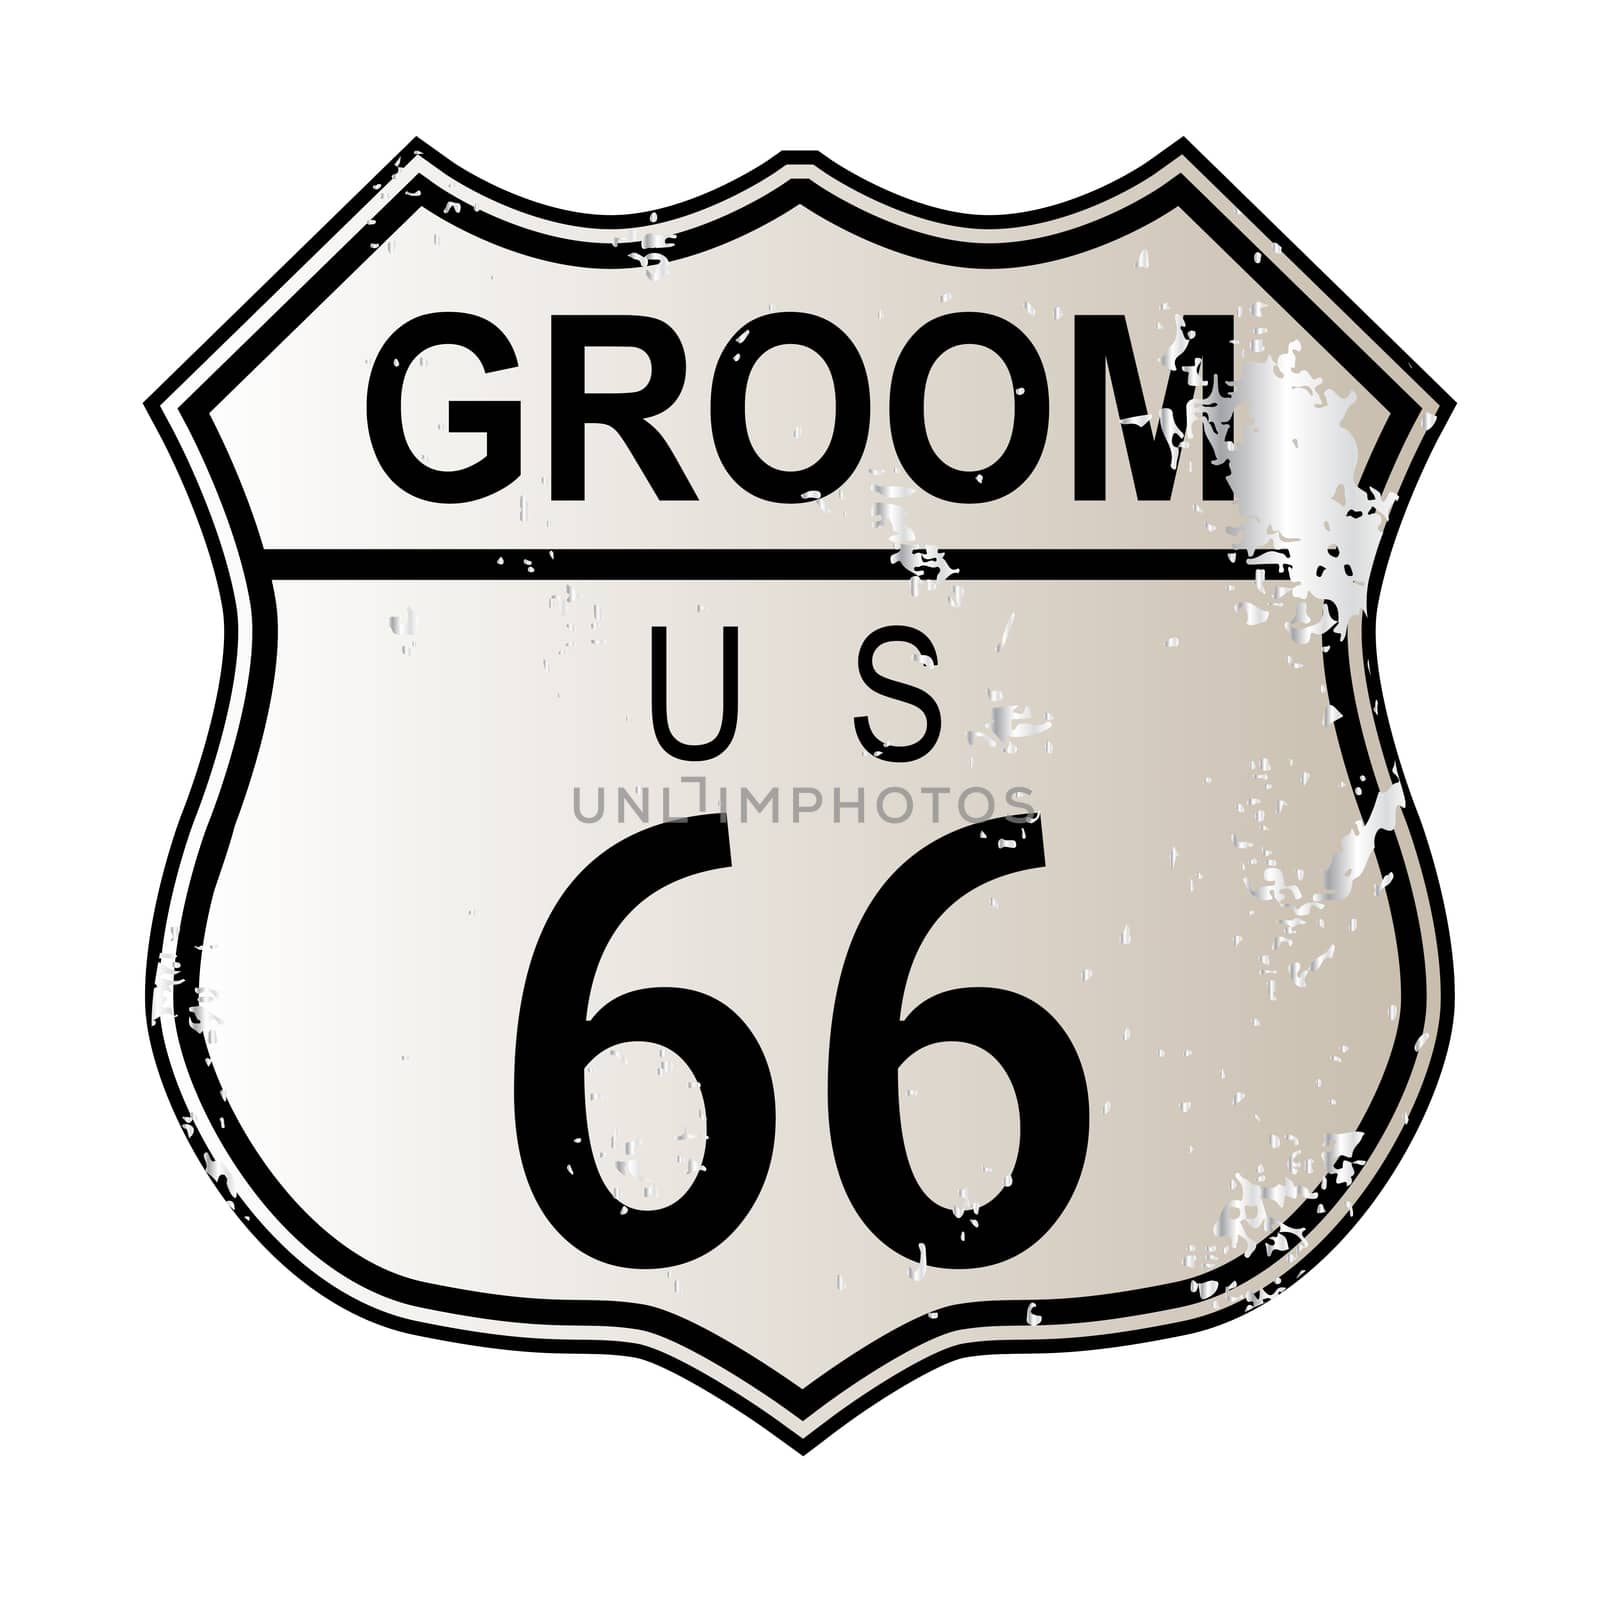 Groom Route 66 traffic sign over a white background and the legend ROUTE US 66